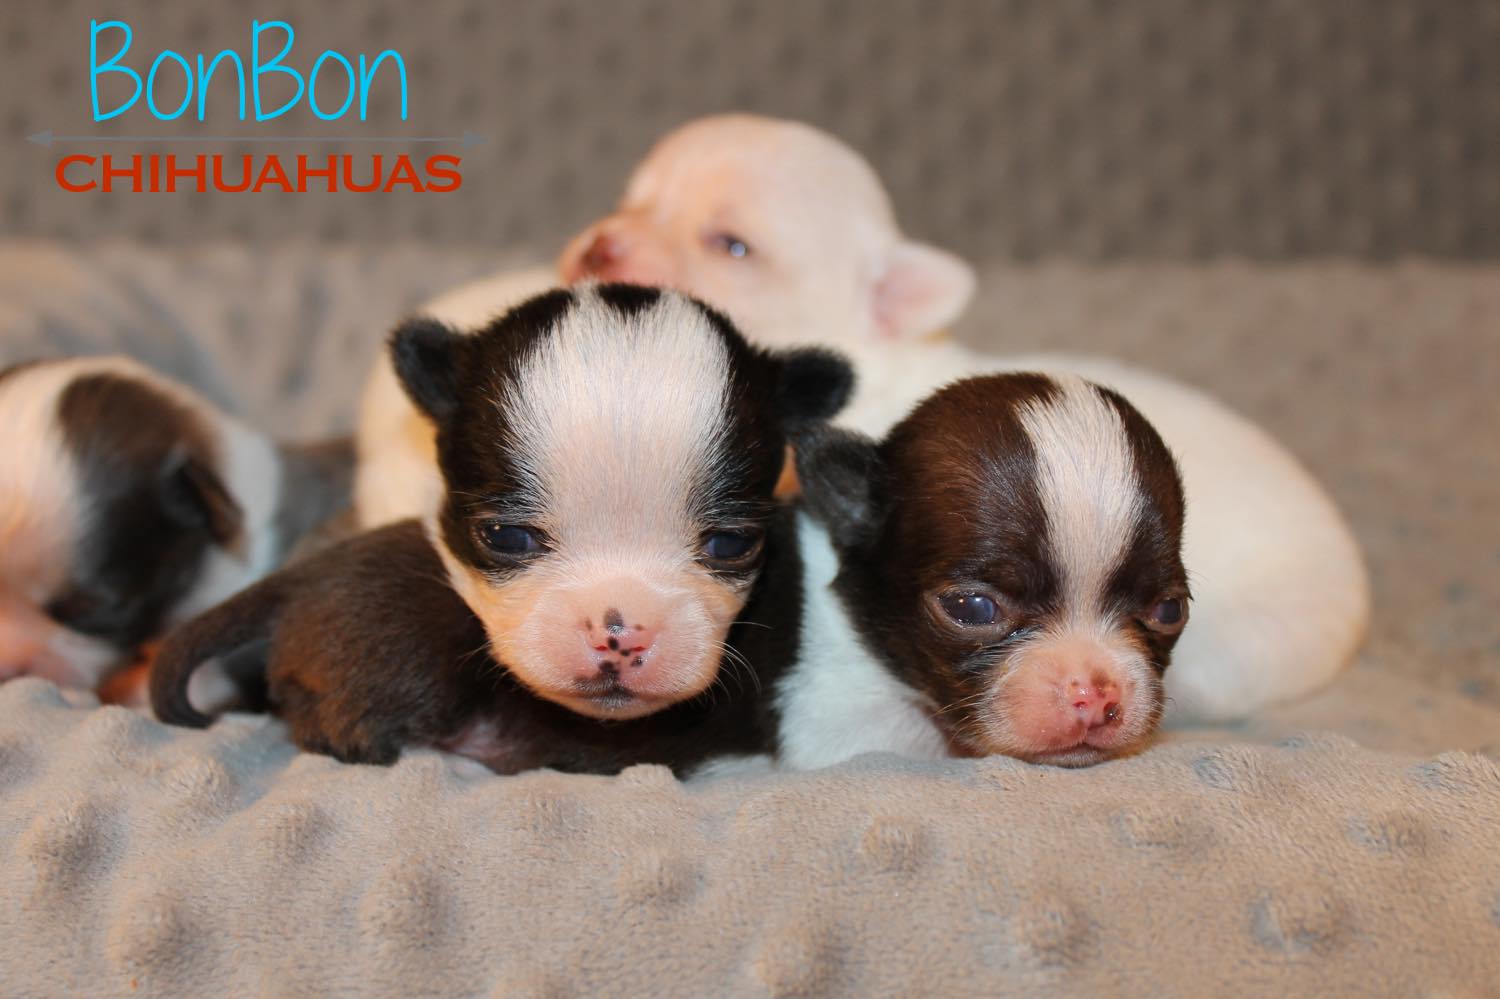 tiny two week old chihuahua puppies snuggle